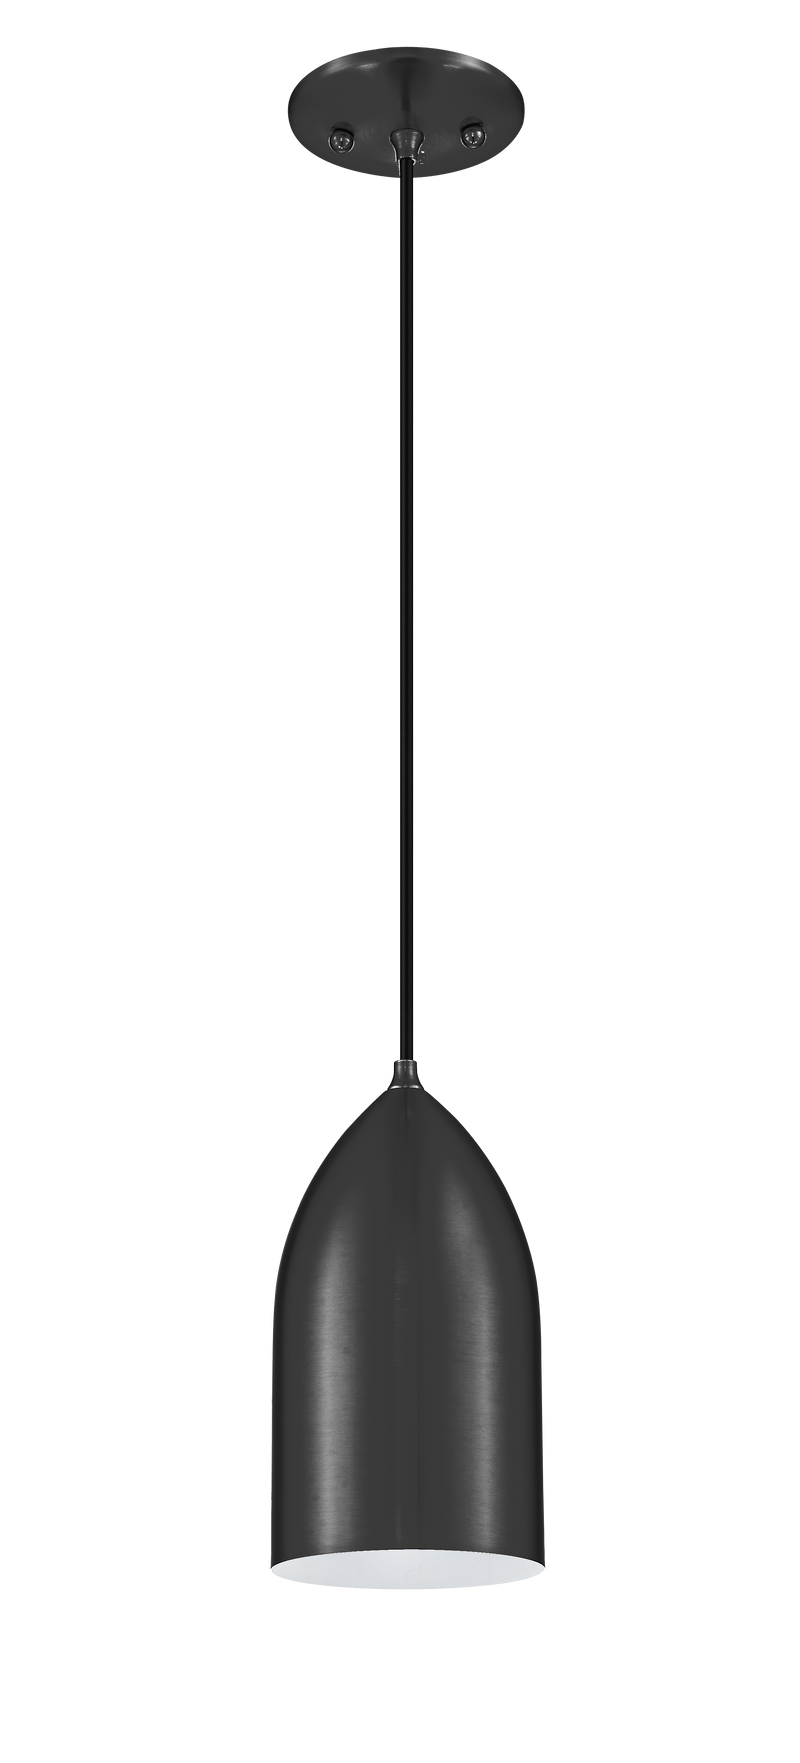 MP-953L-MB/WH(E26) - 1-Light Corded Steel Shade Pendant - MB outer - WH inner